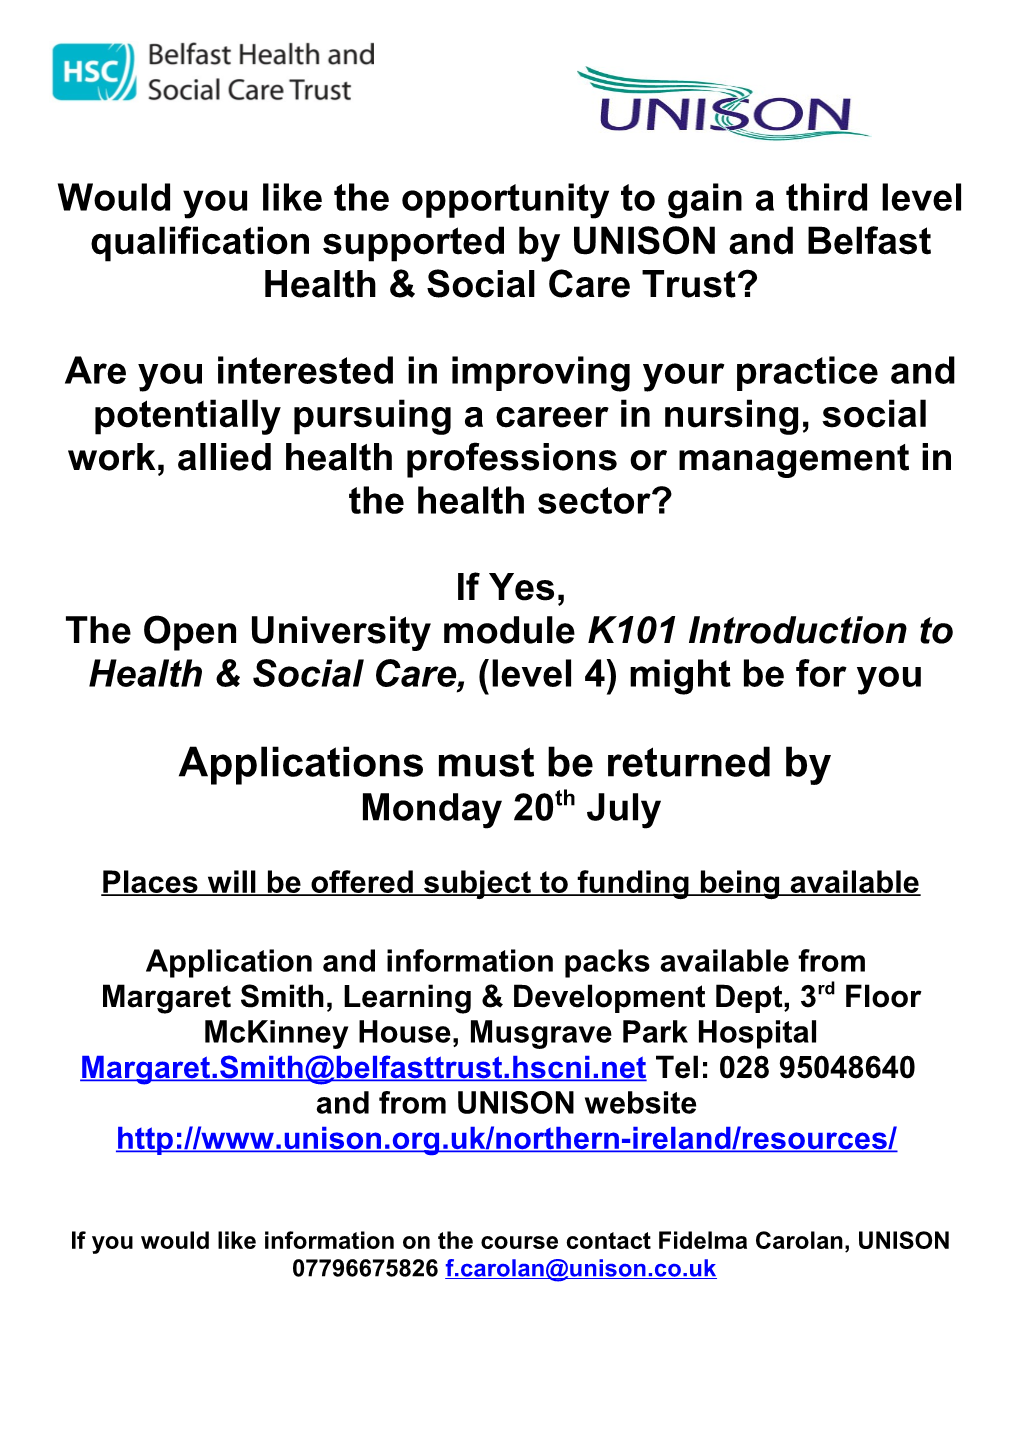 Belfast Trust K101 Introduction to Health & Social Care, (Level 4) Application Pack